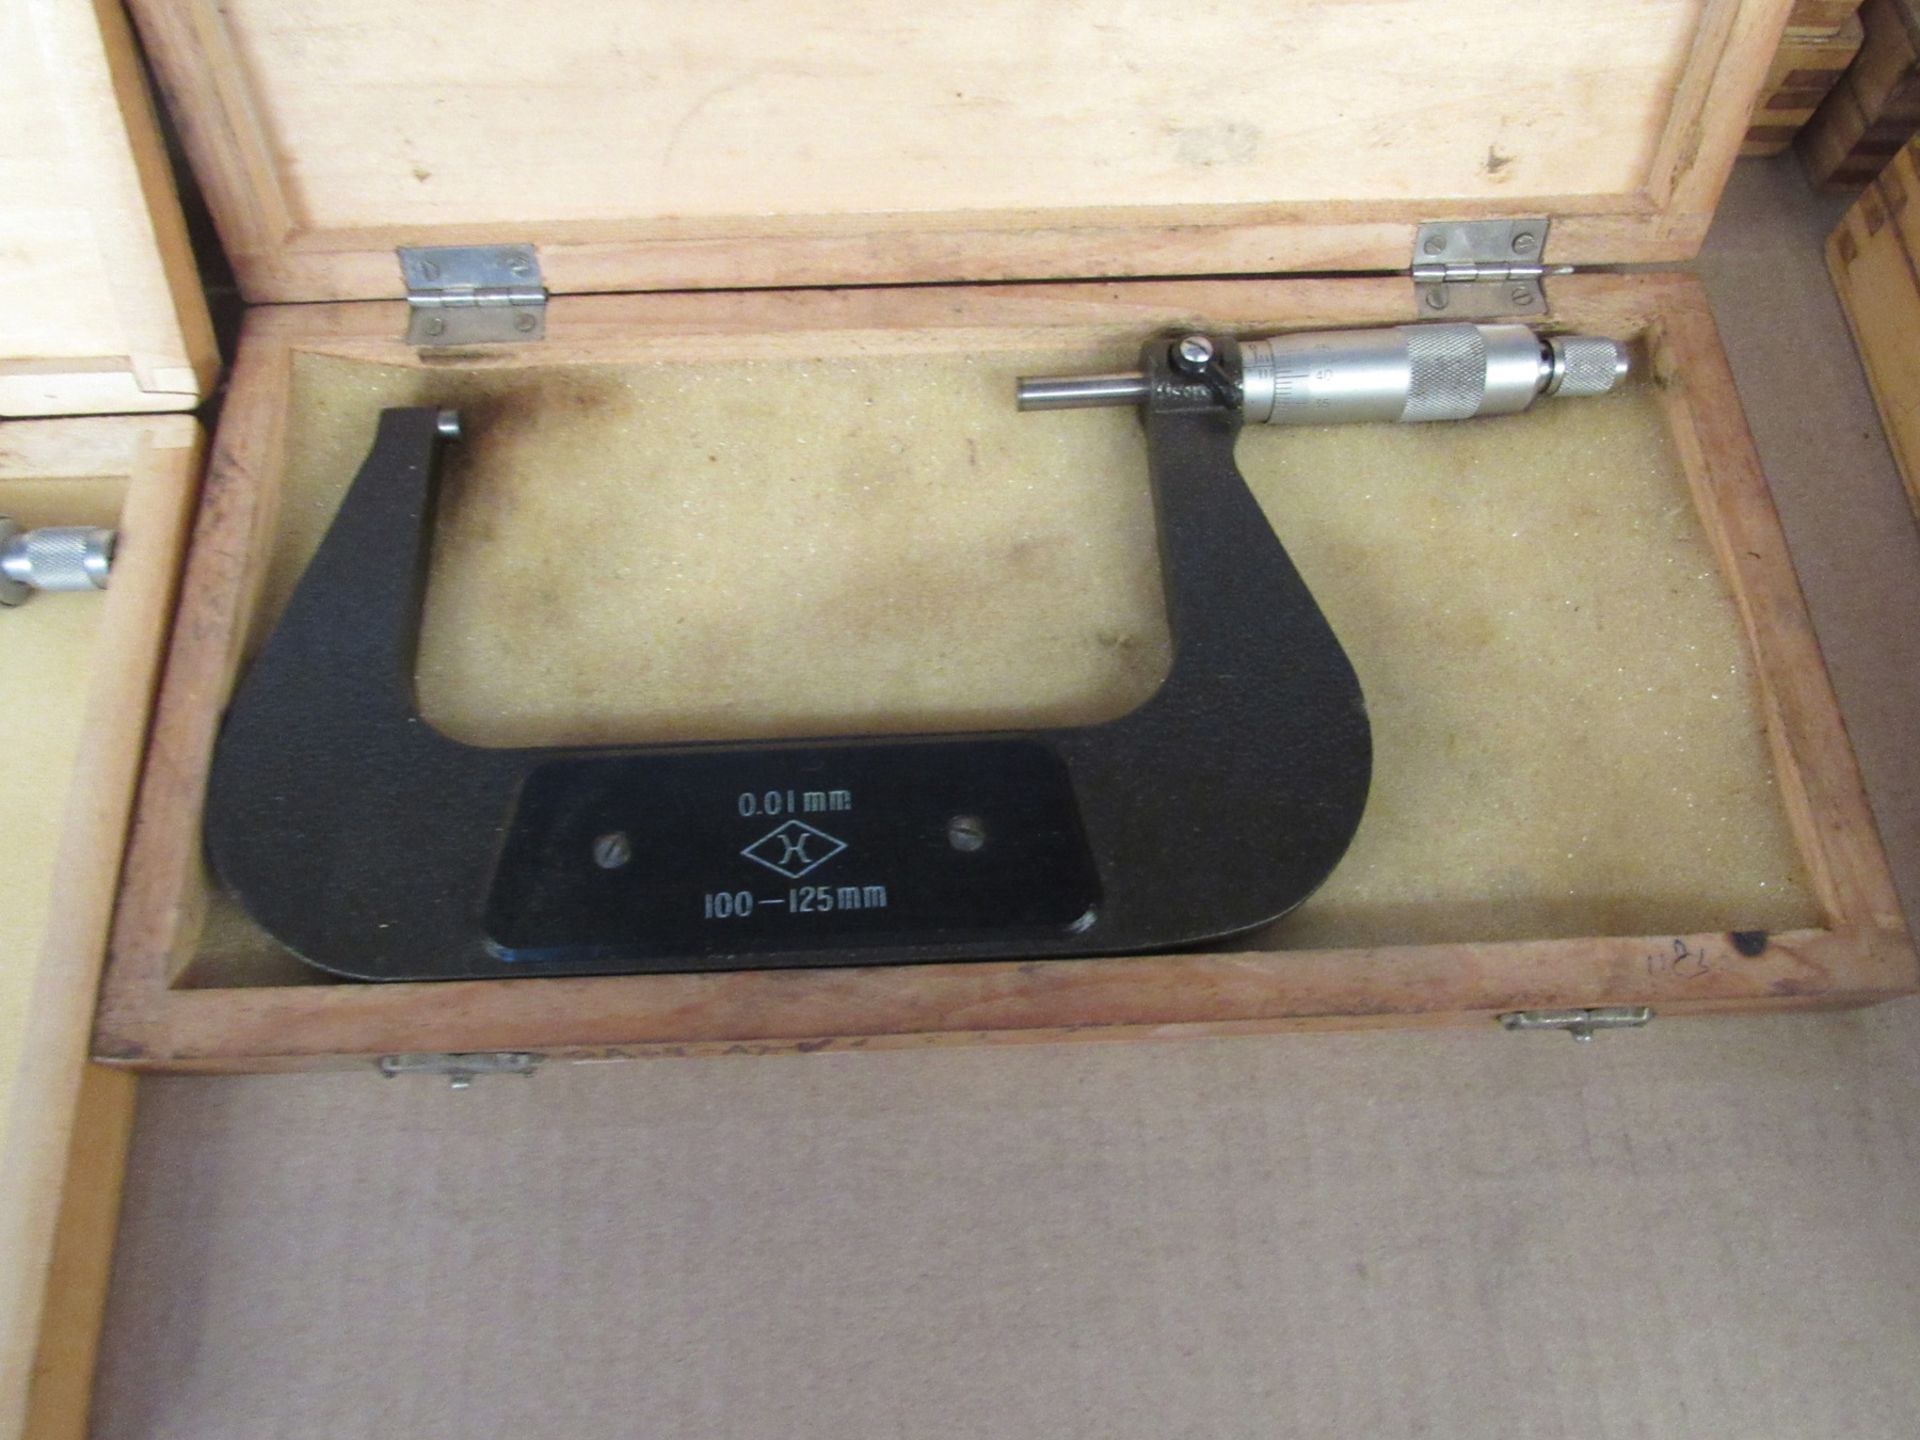 Lot of 5 O.D. Micrometers - Image 6 of 6